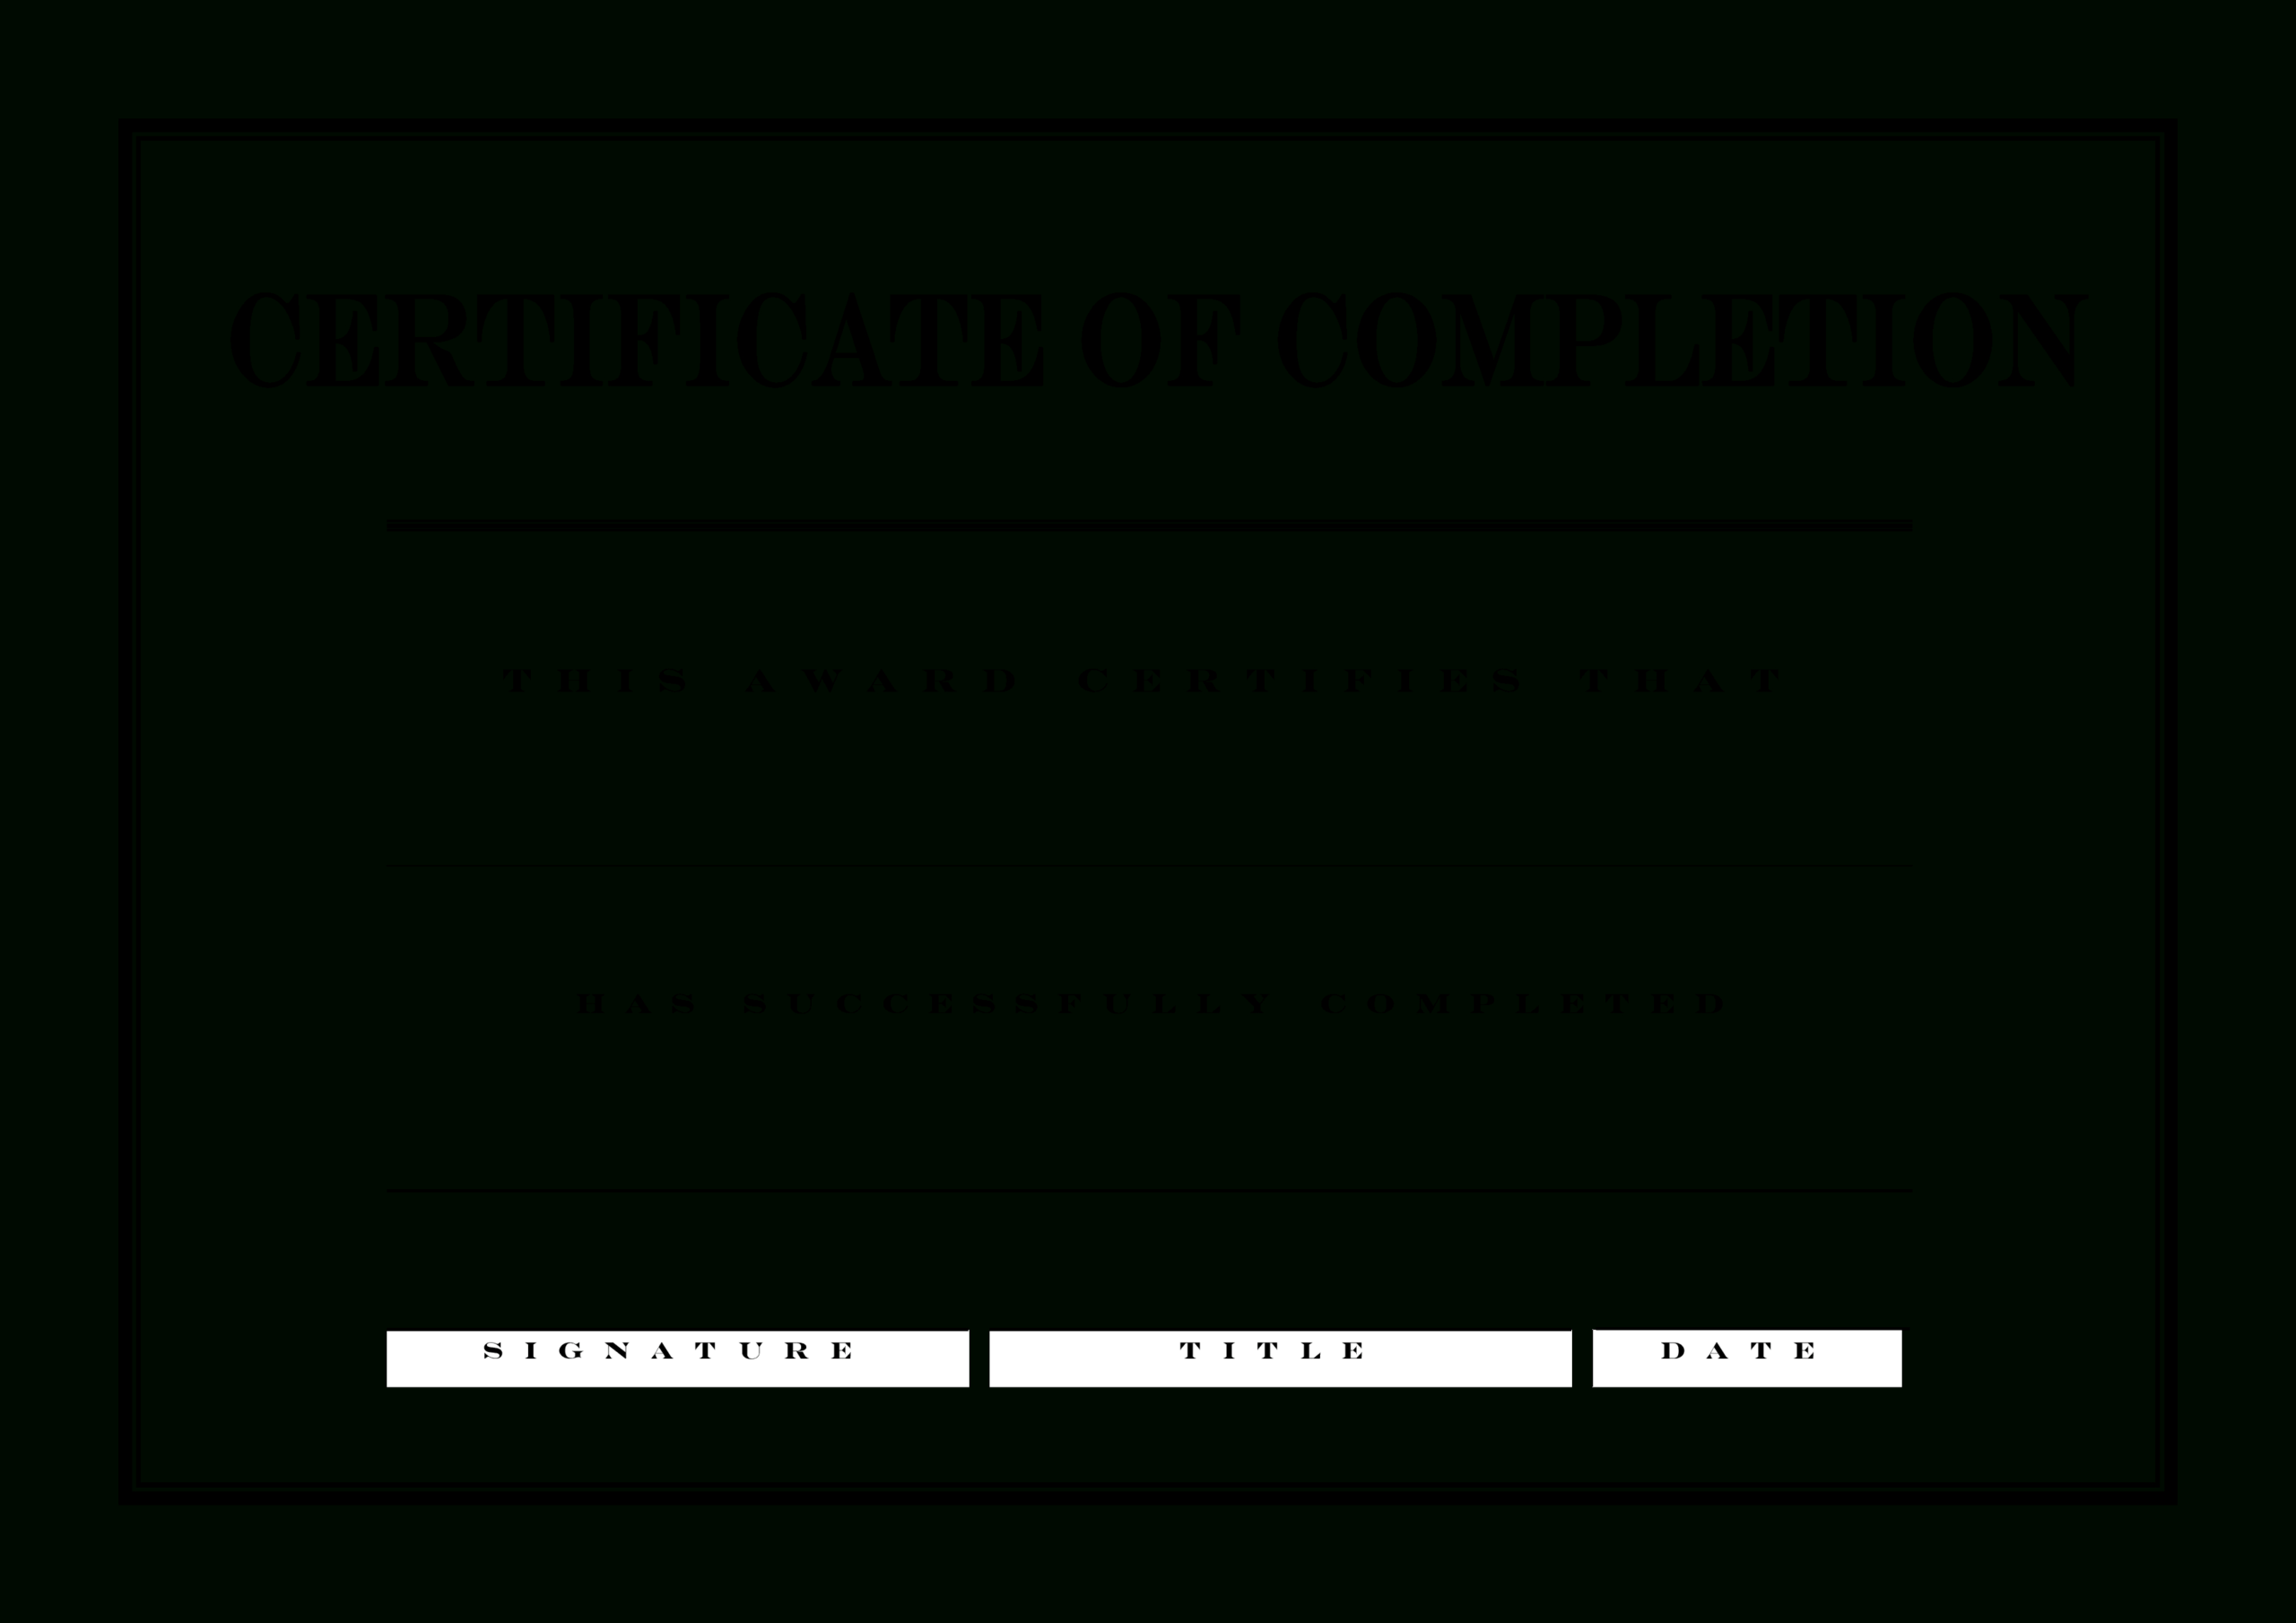 Certificate Of Completion | Templates At Allbusinesstemplates Pertaining To Blank Certificate Of Achievement Template